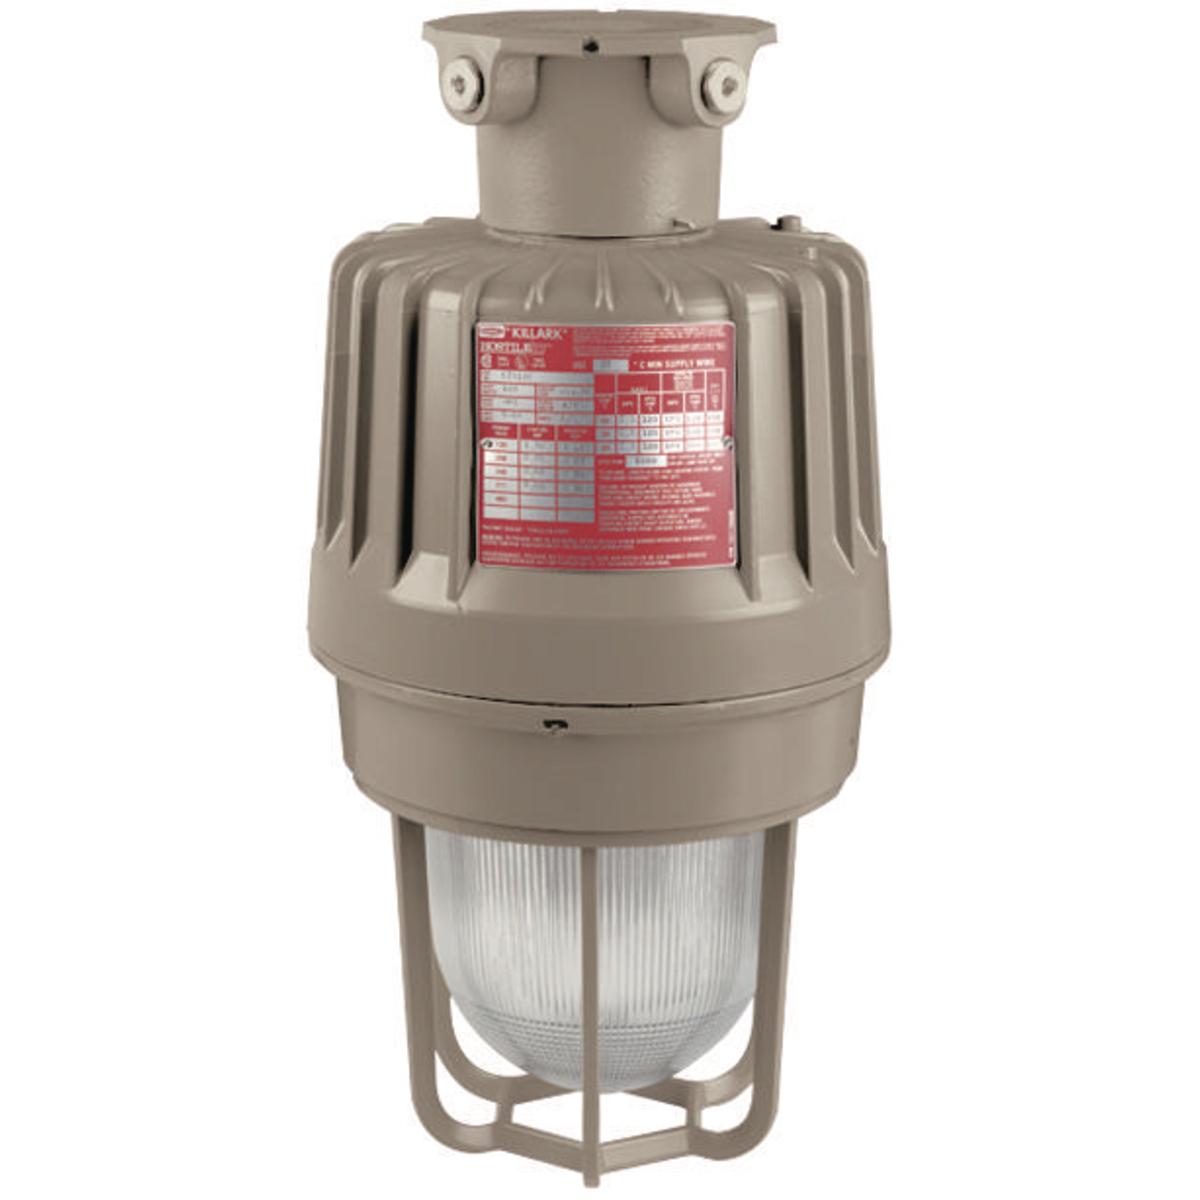 Hubbell EZS100X3 HID 100W Quadri-Volt High Pressure Sodium 1" Ceiling Mount  ; Three light sources – High Pressure Sodium (50-400W), Metal Halide (70-400W) and Pulse Start Metal Halide (175-400W) ; Mounting choice –Pendant, ceiling, 25˚ stanchion or 90˚ wall mount, all wi